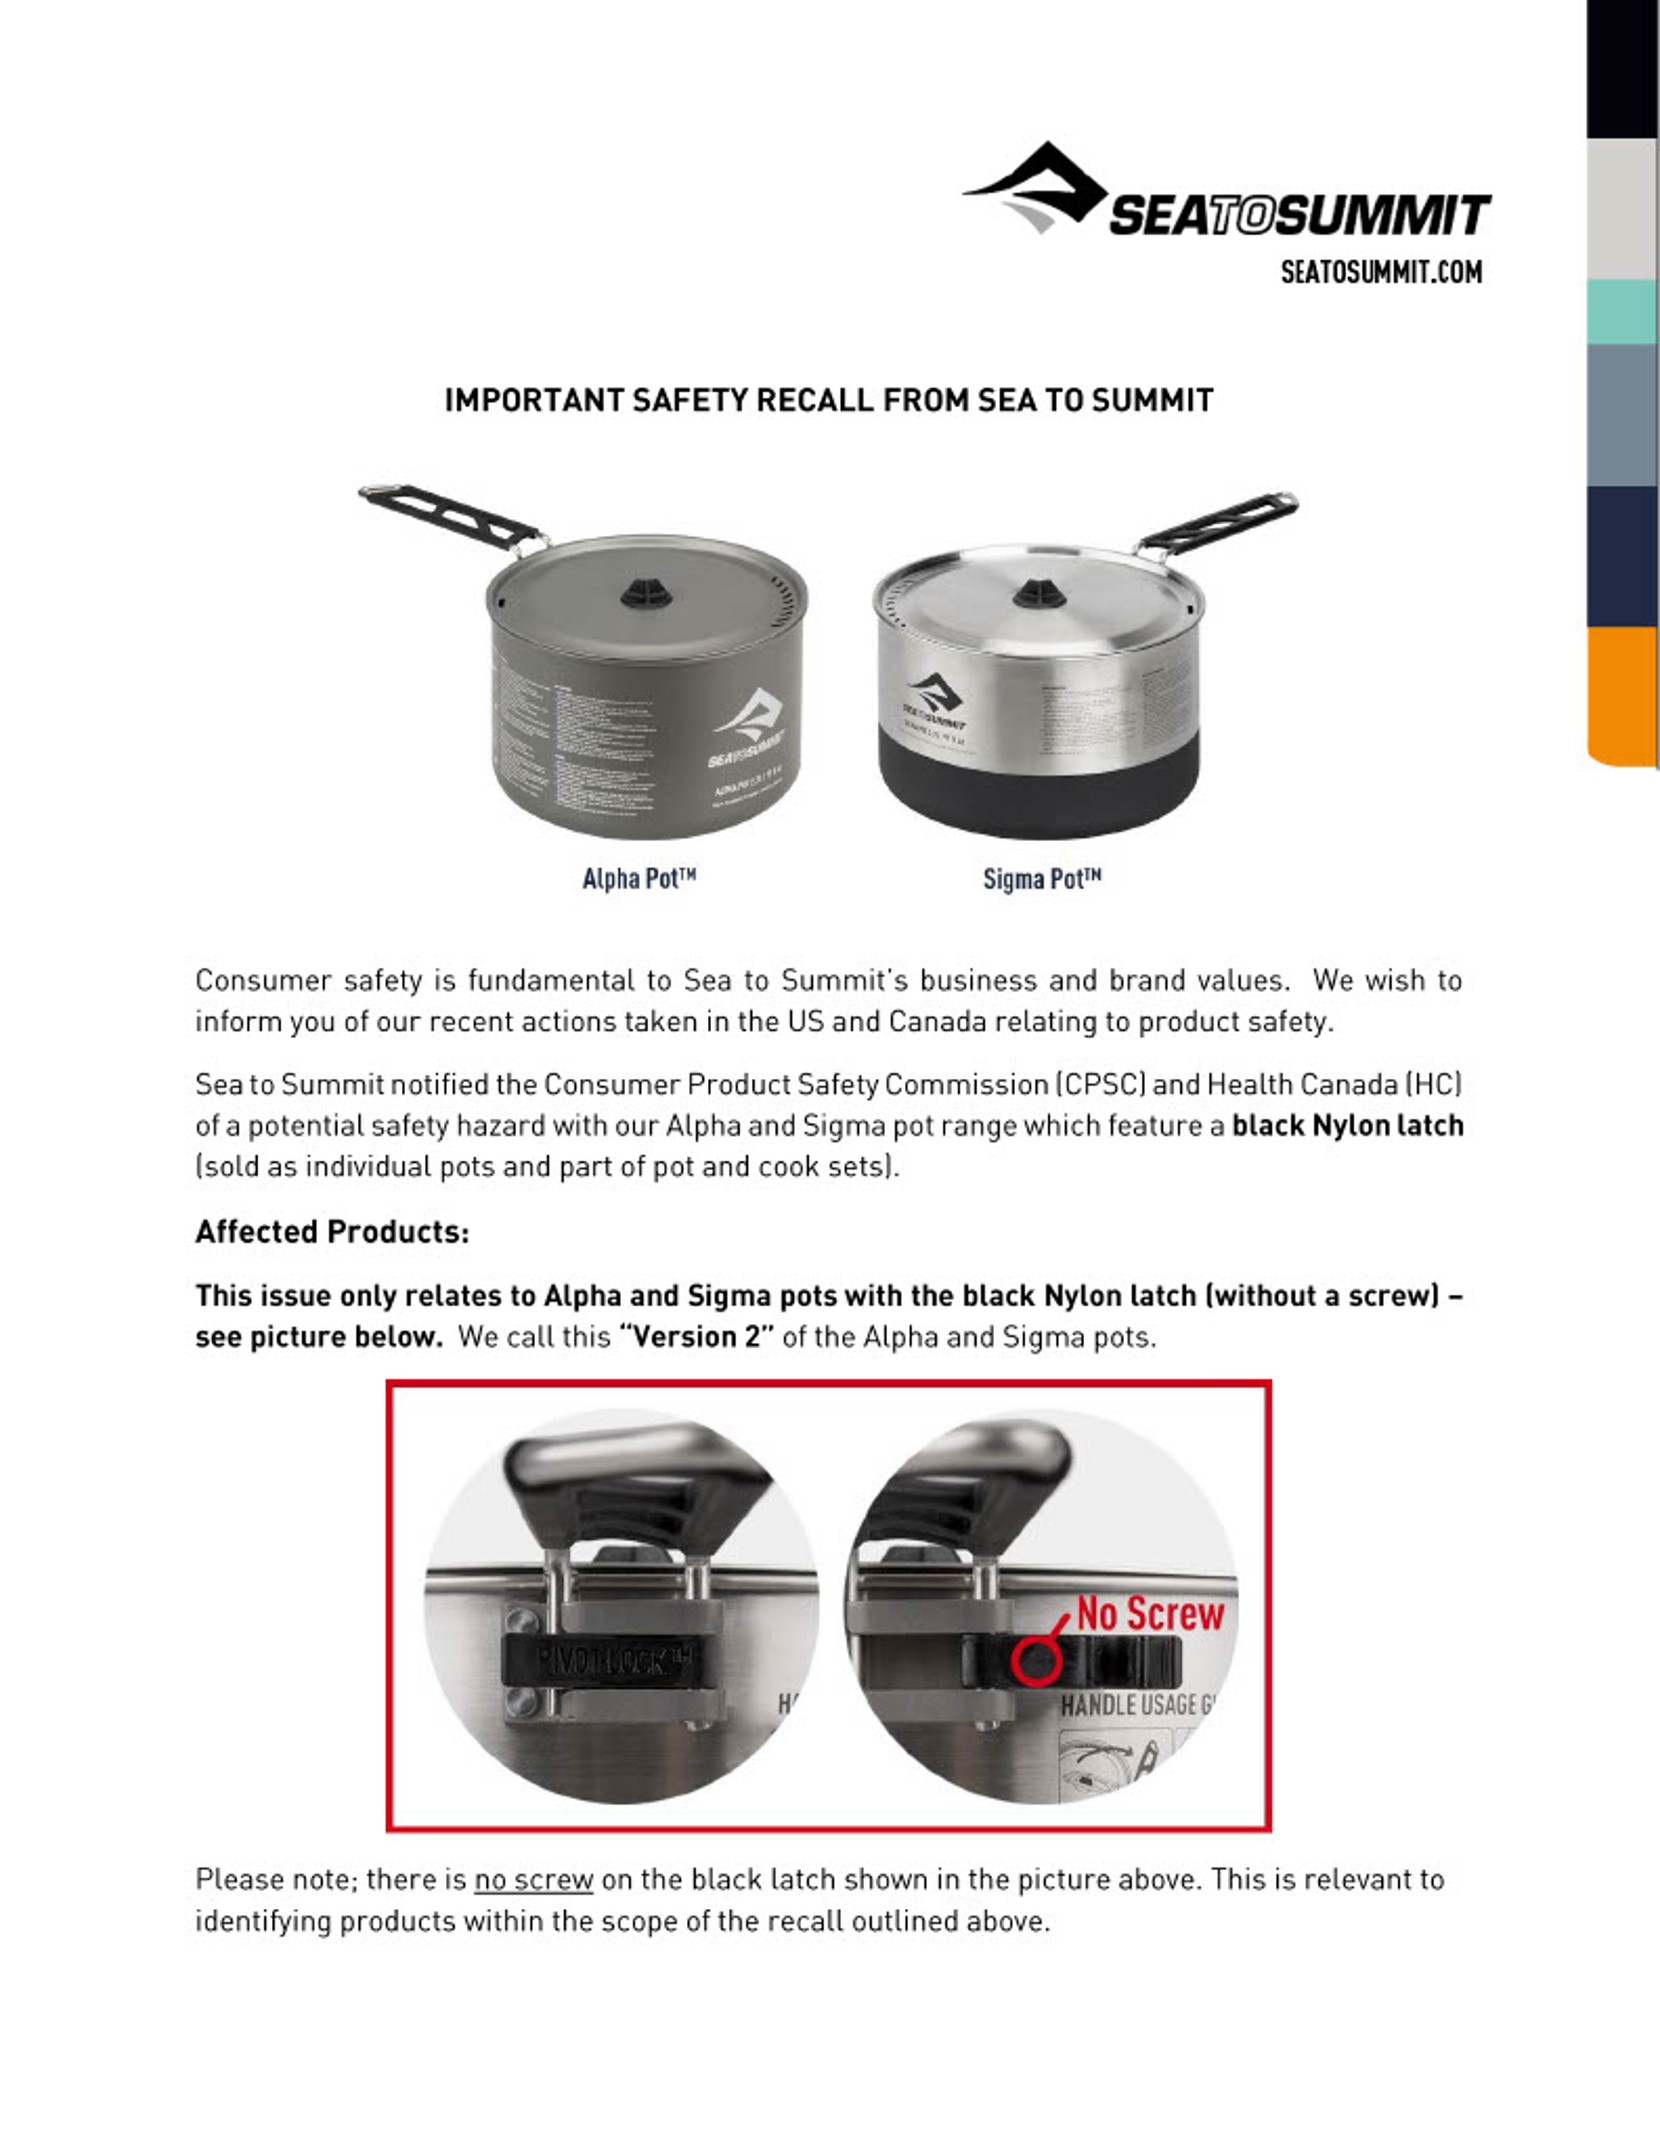 Recall letter 1 about Sea to Summit Pots.